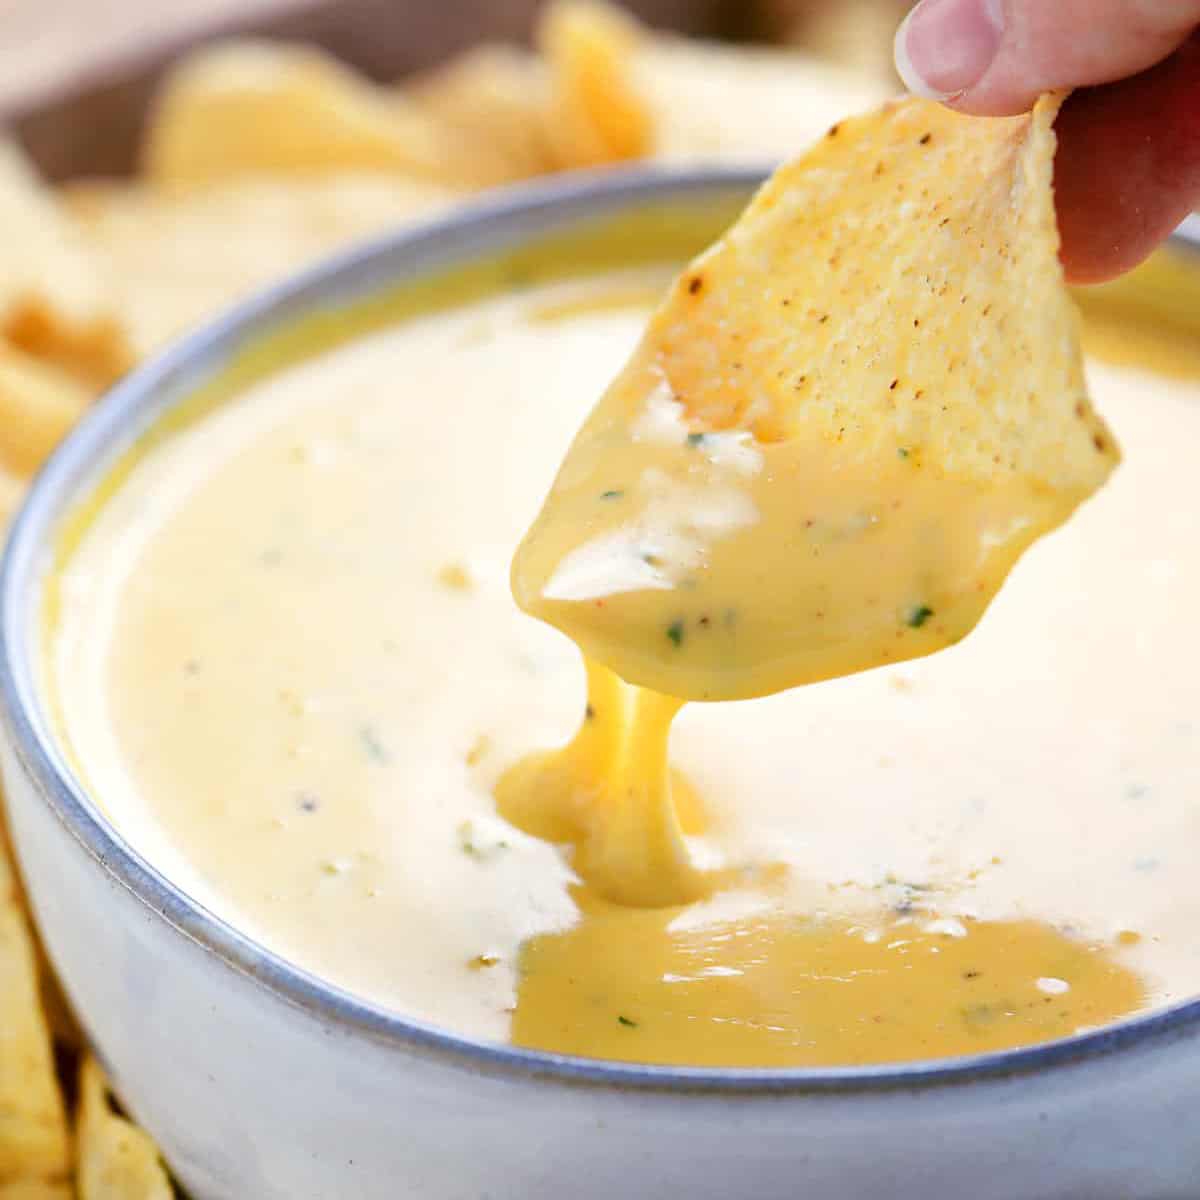 chip dipped in queso.